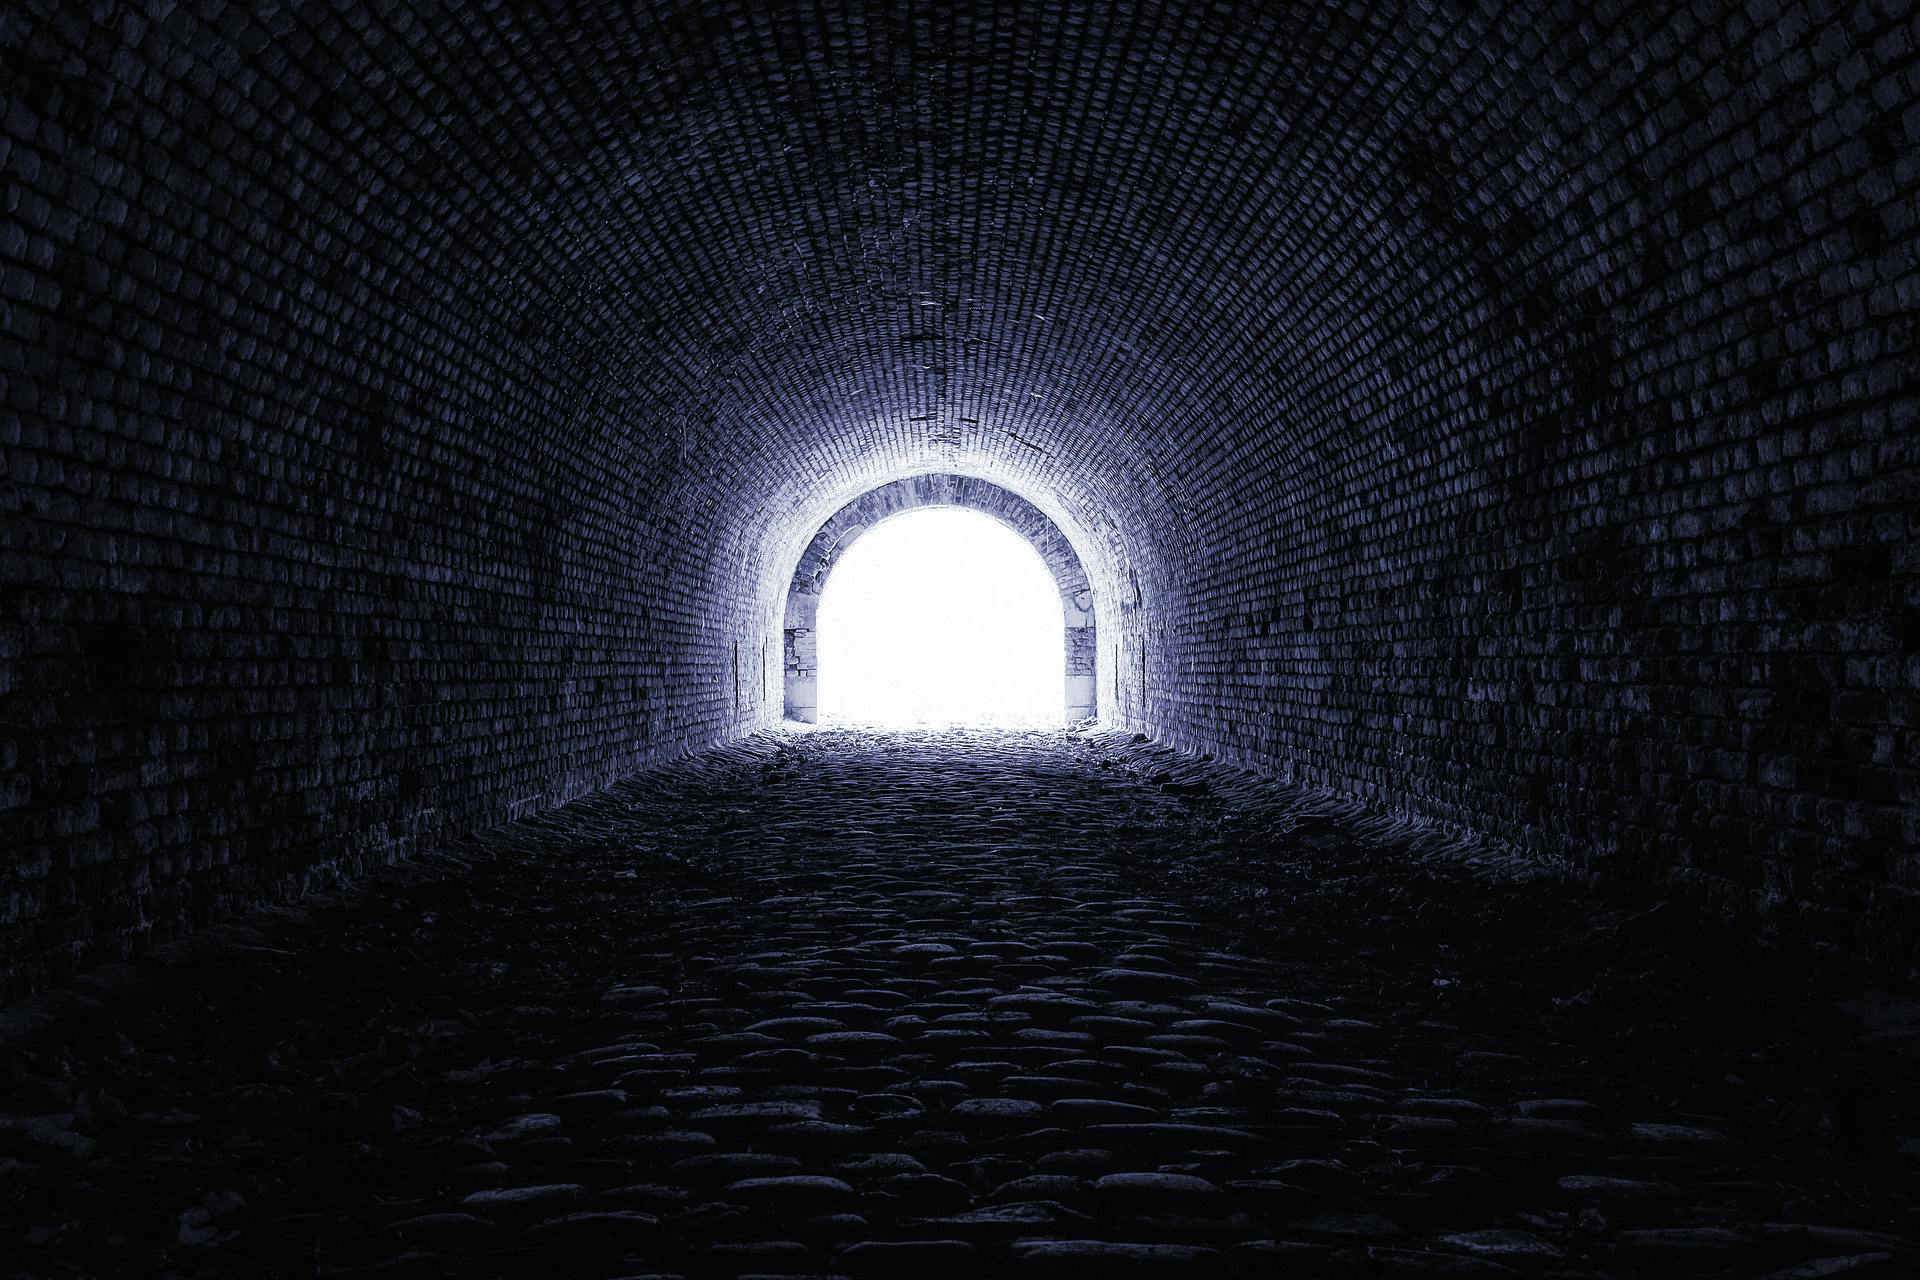 Is there a light at the end of this very dark tunnel?